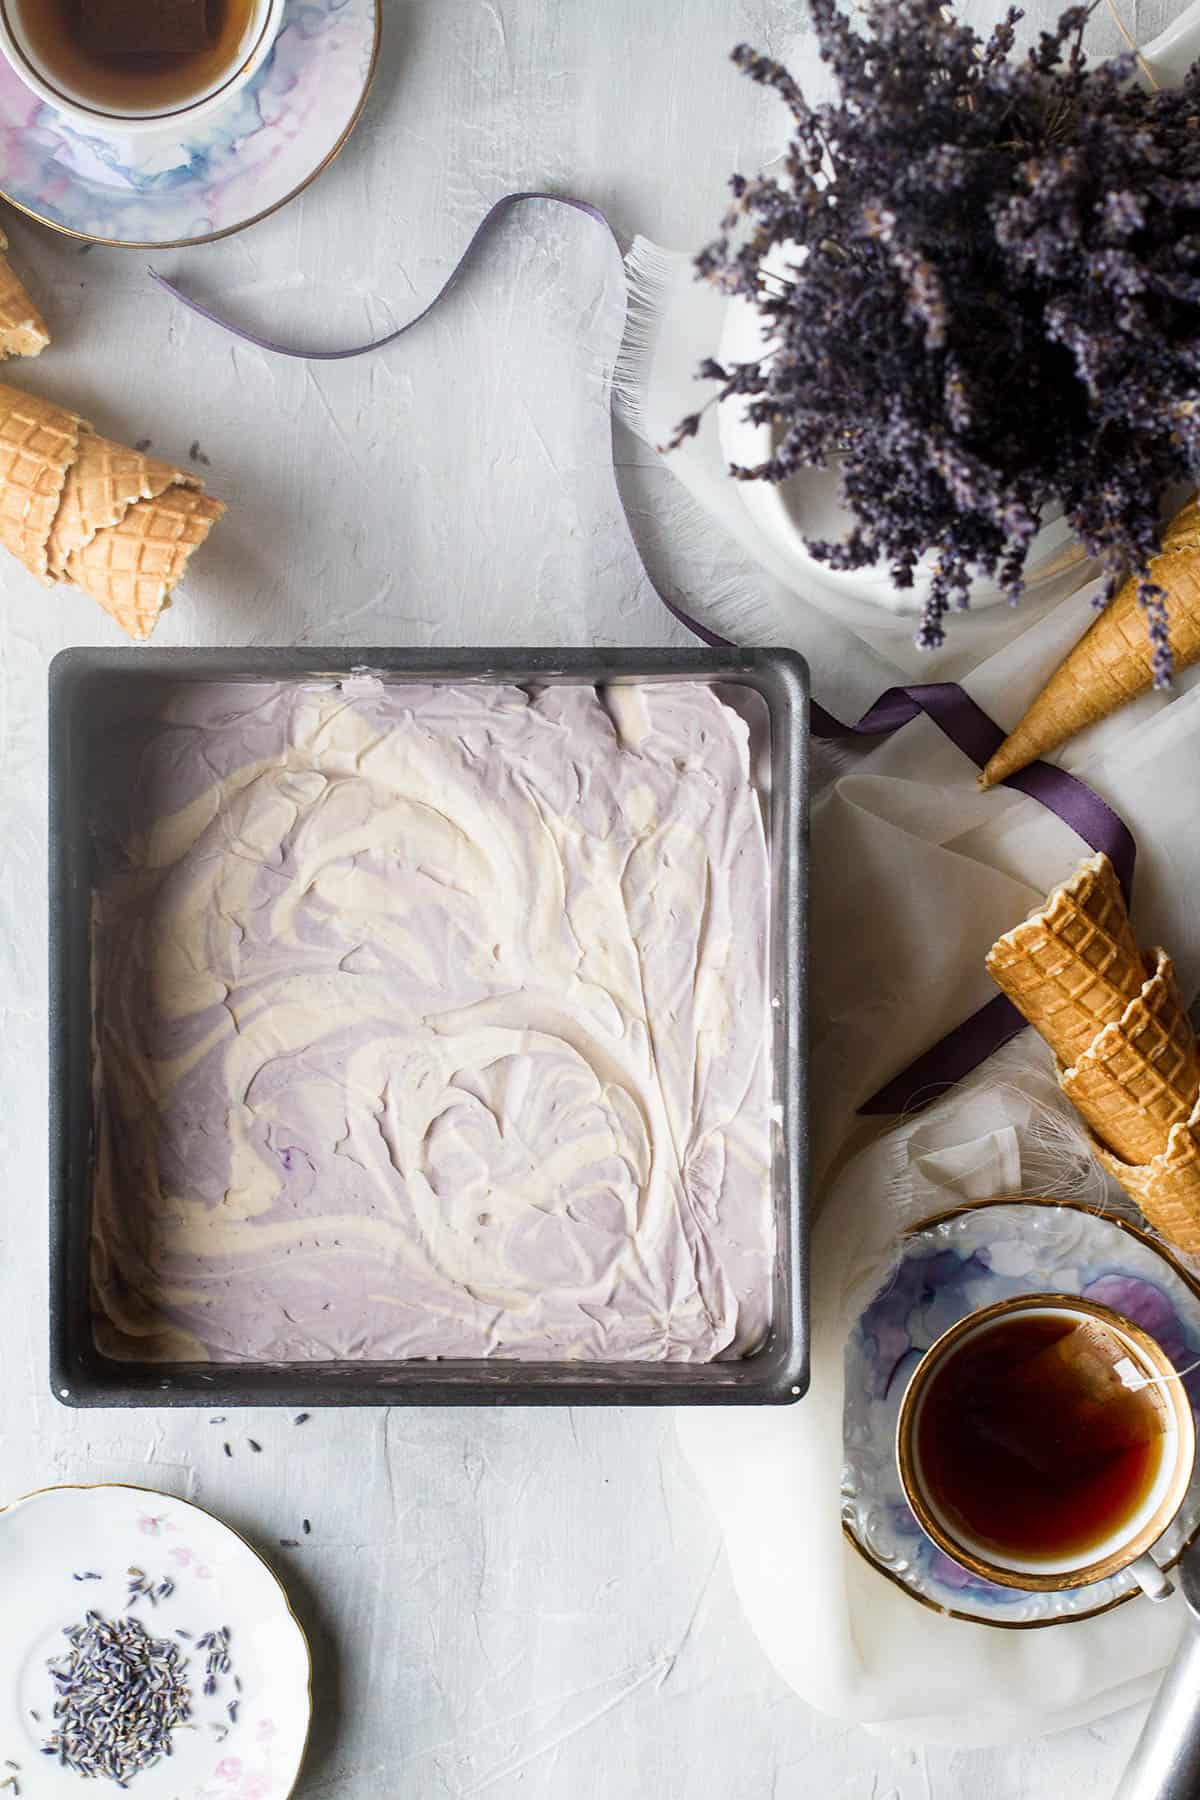 An 8x8 inch baking pan with ice cream.